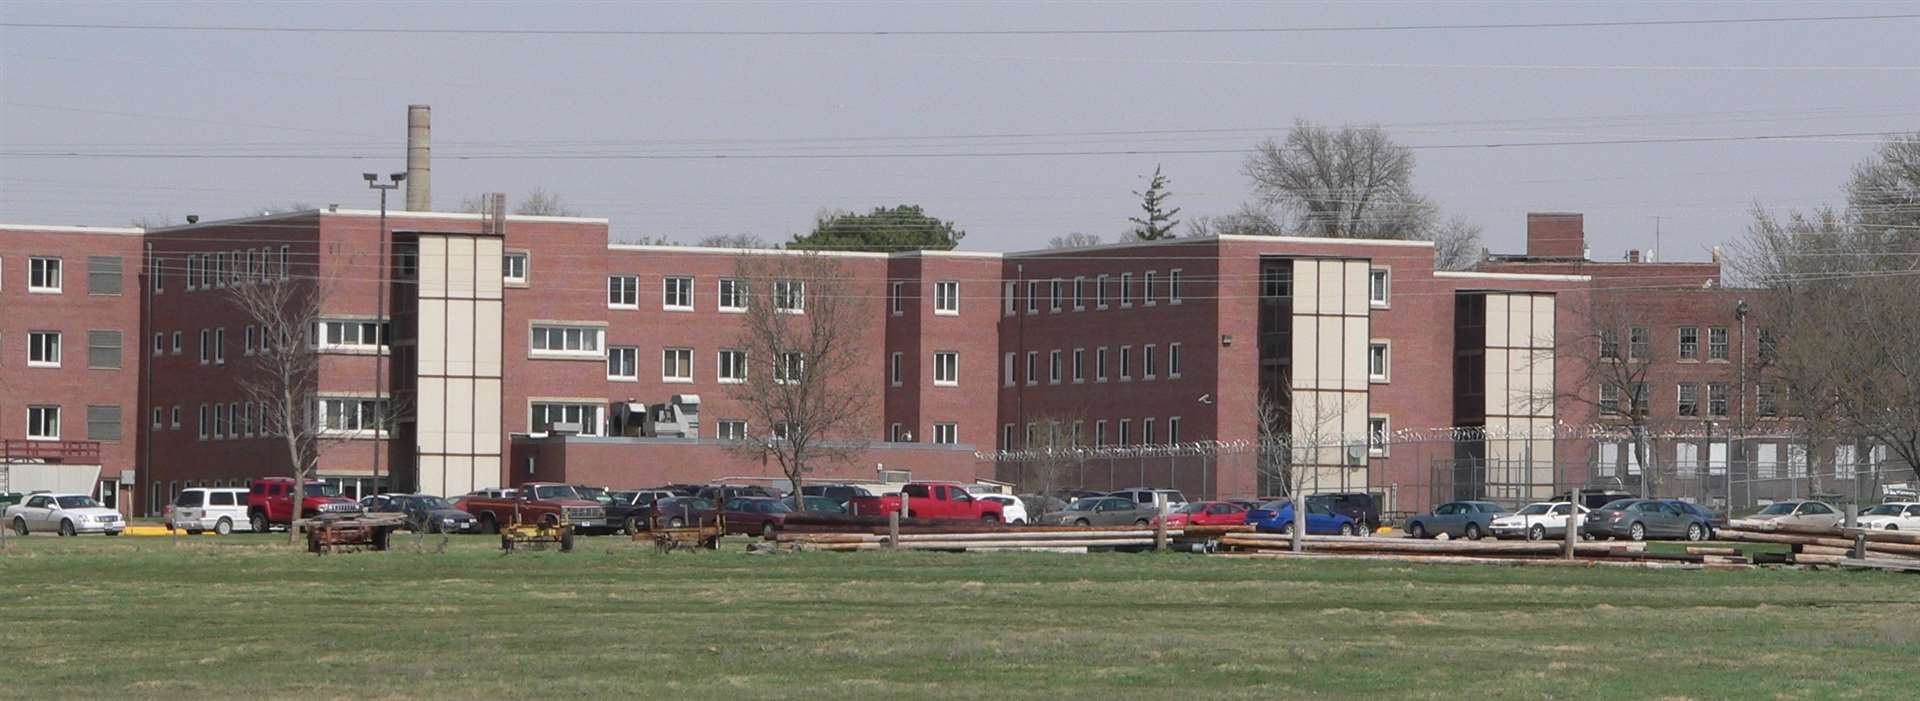 The Norfolk Regional Treatment Centre where Dale Bolinger is being held (1299066)